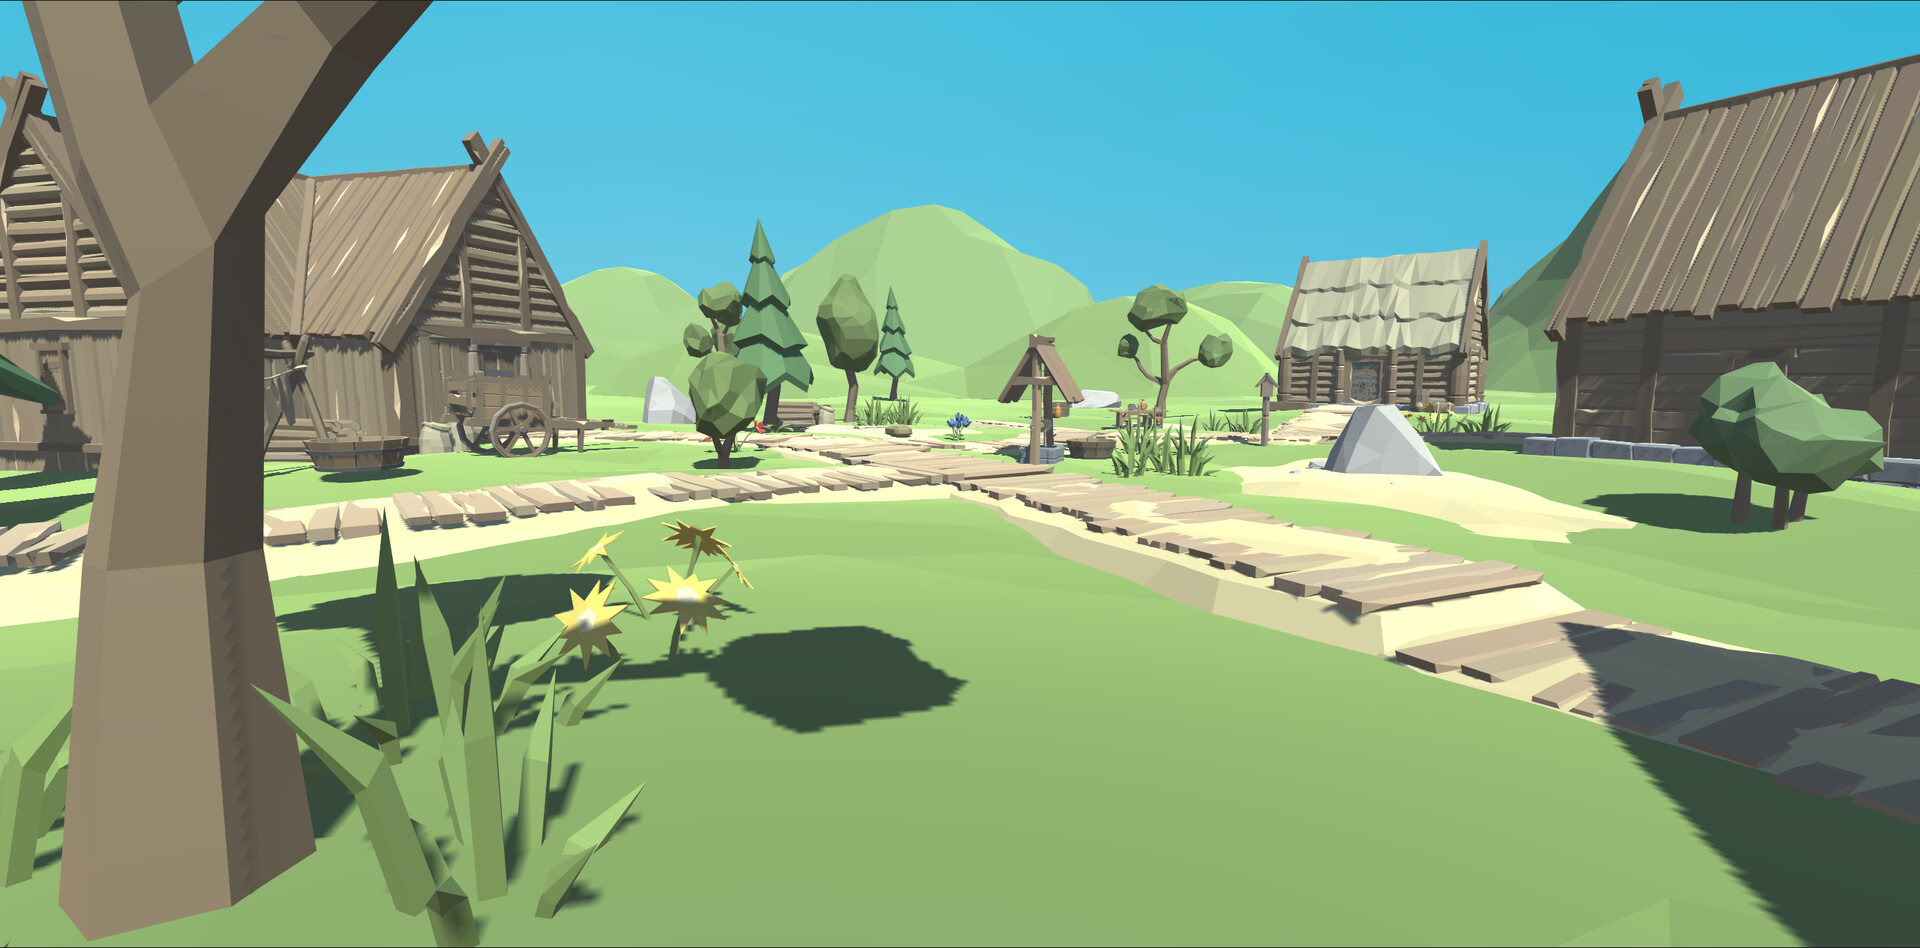 This new City-Builder game Featured Screenshot #1